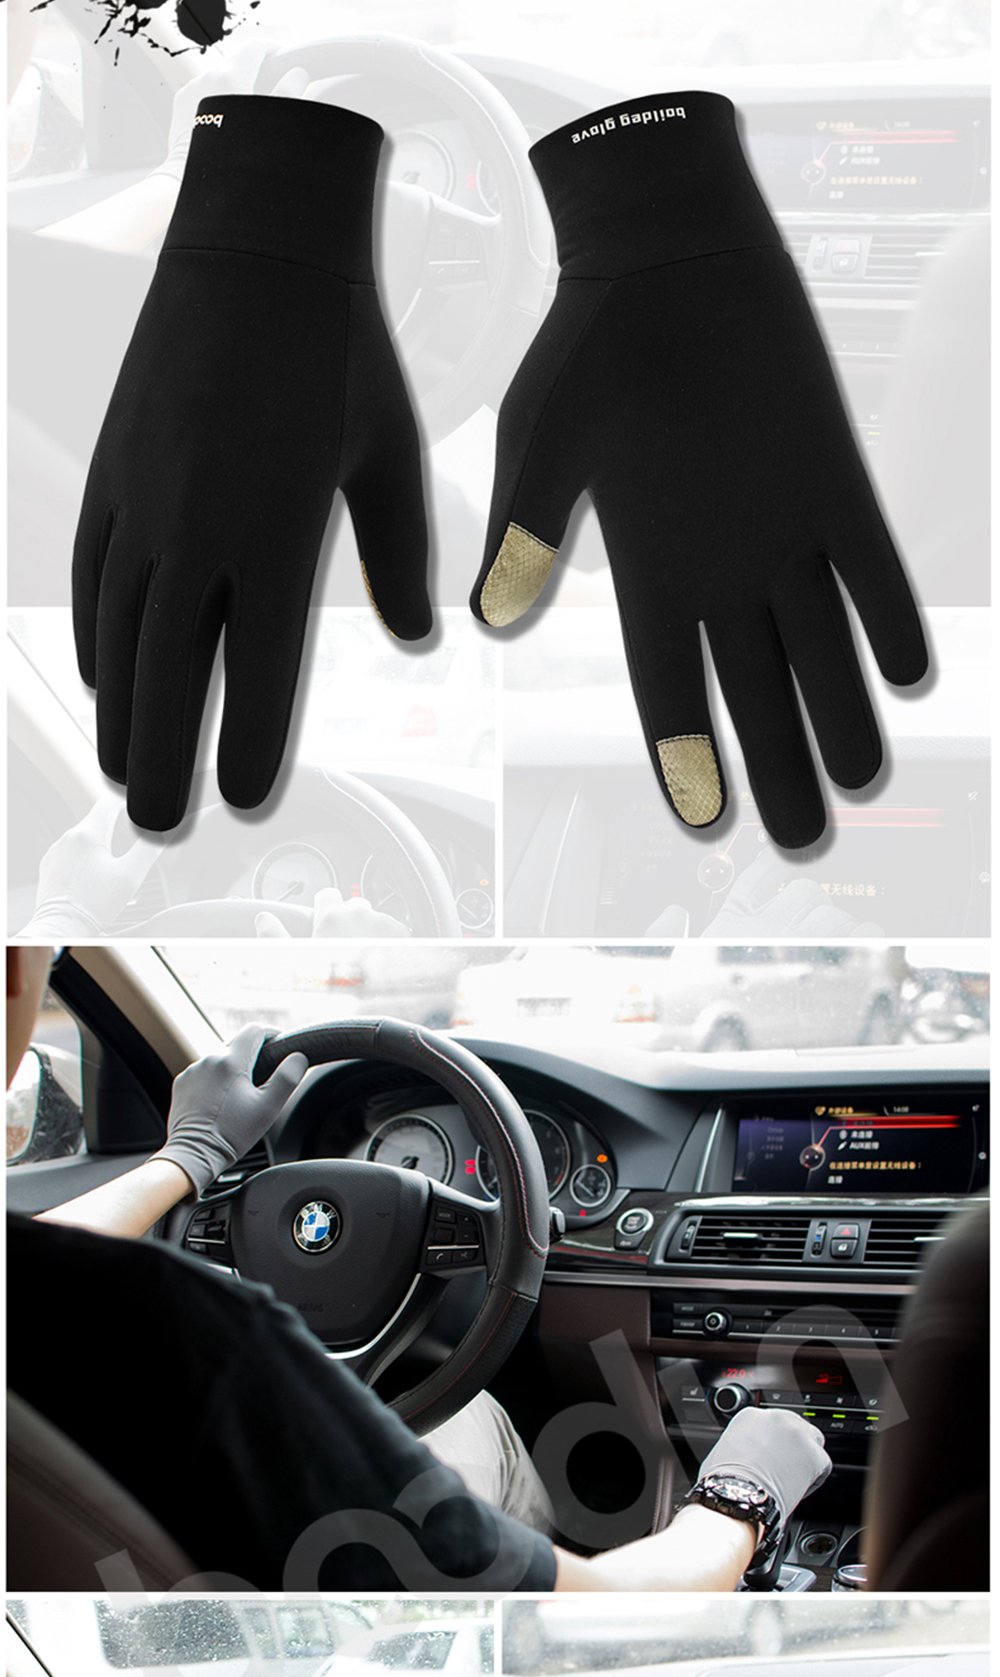 Bakeey-Screen-Touch-Gloves-Elastic-Lycra-Warm-Anti-slip-Anti-sweat-Electronic-Sports-Outdoor-Motorcy-1625057-7